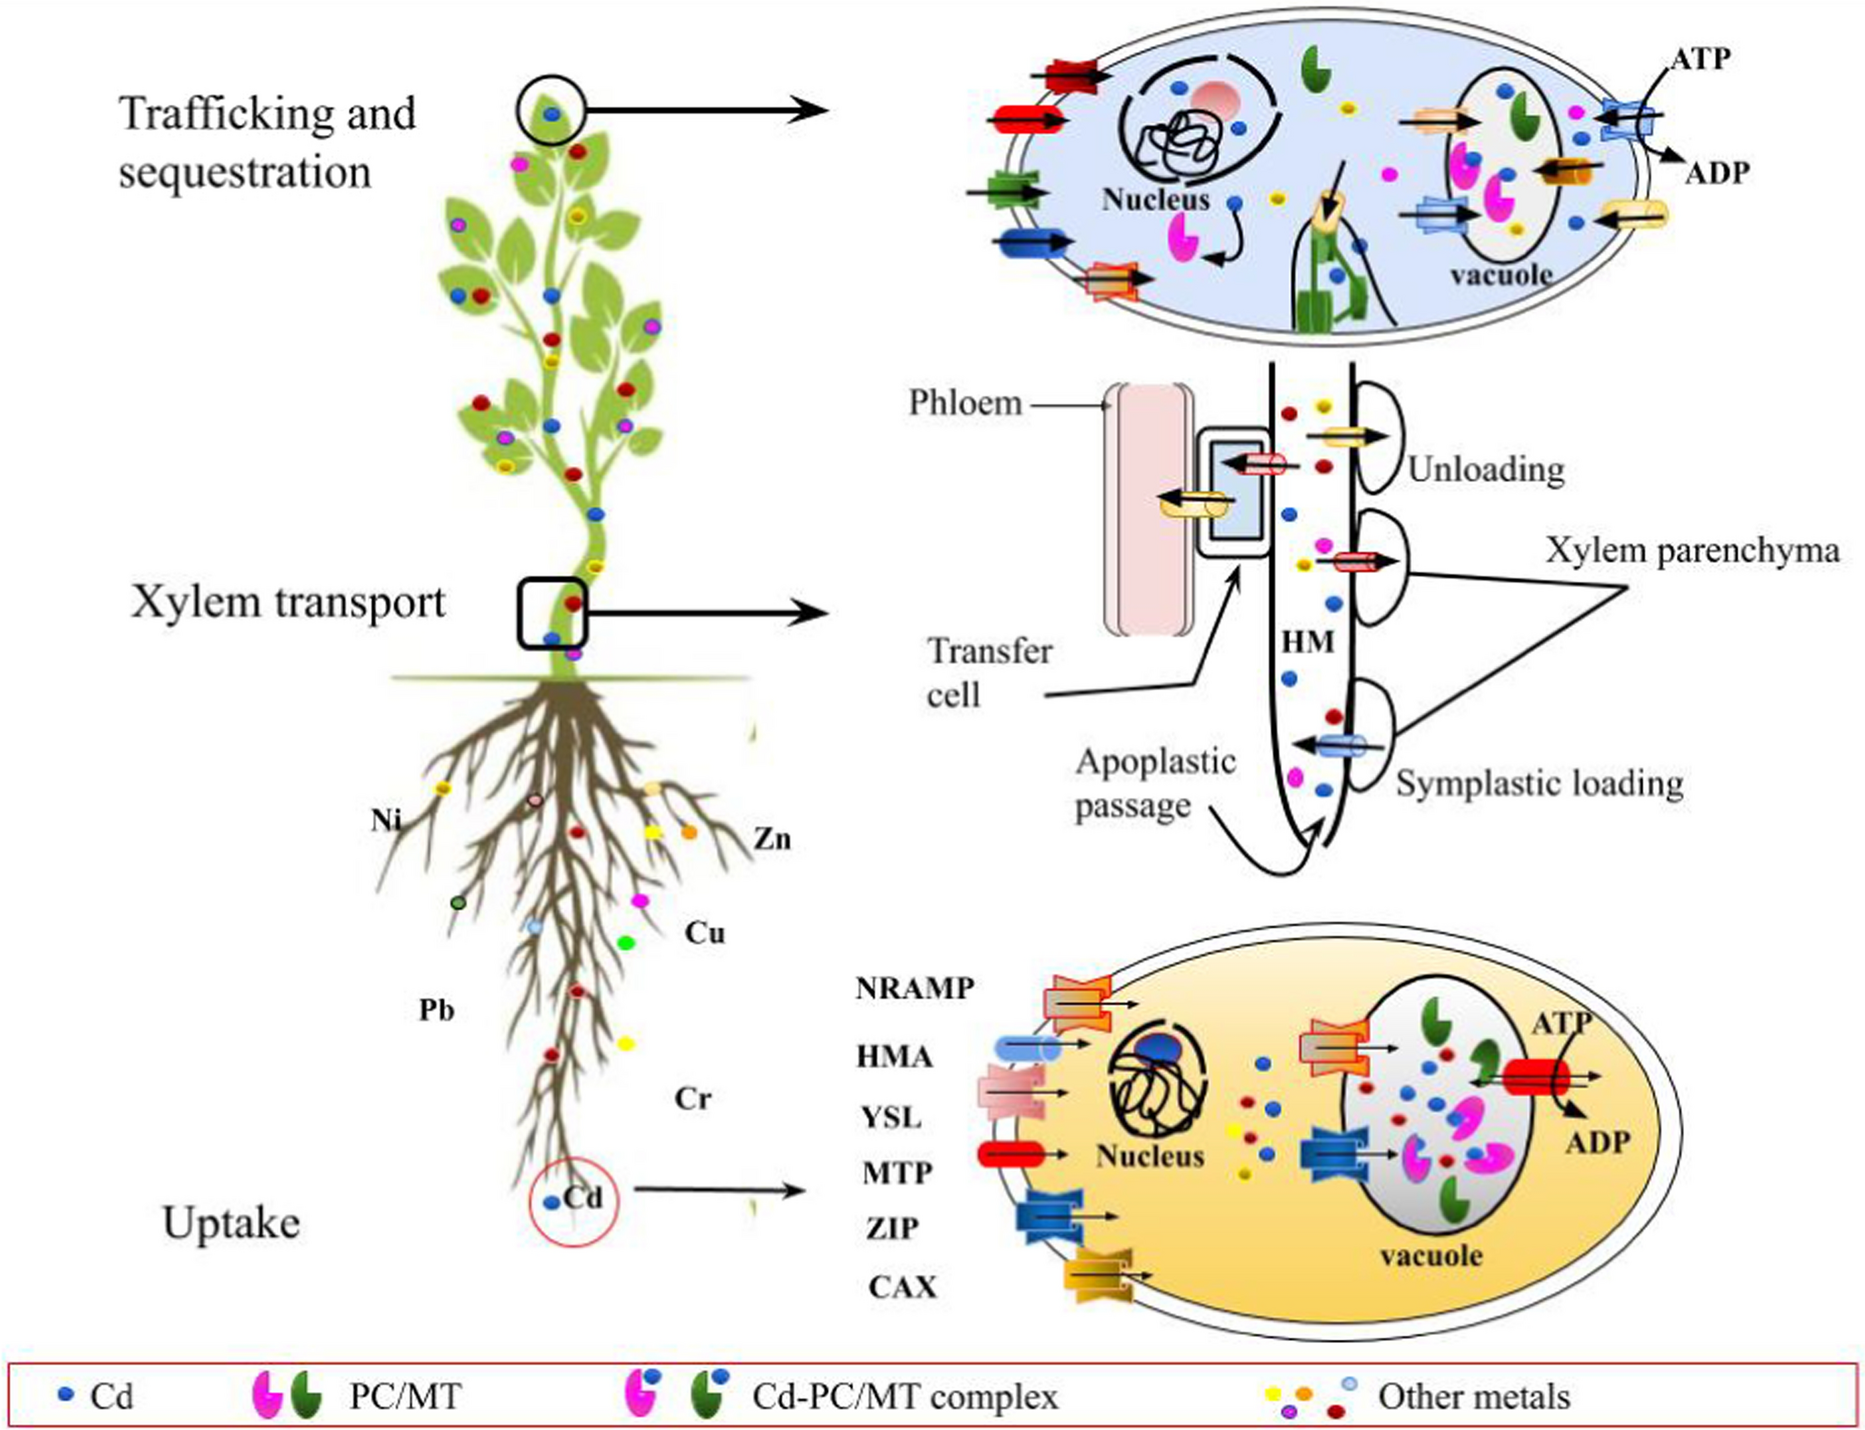 Cadmium toxicity: its’ uptake and retaliation by plant defence system and ja signaling